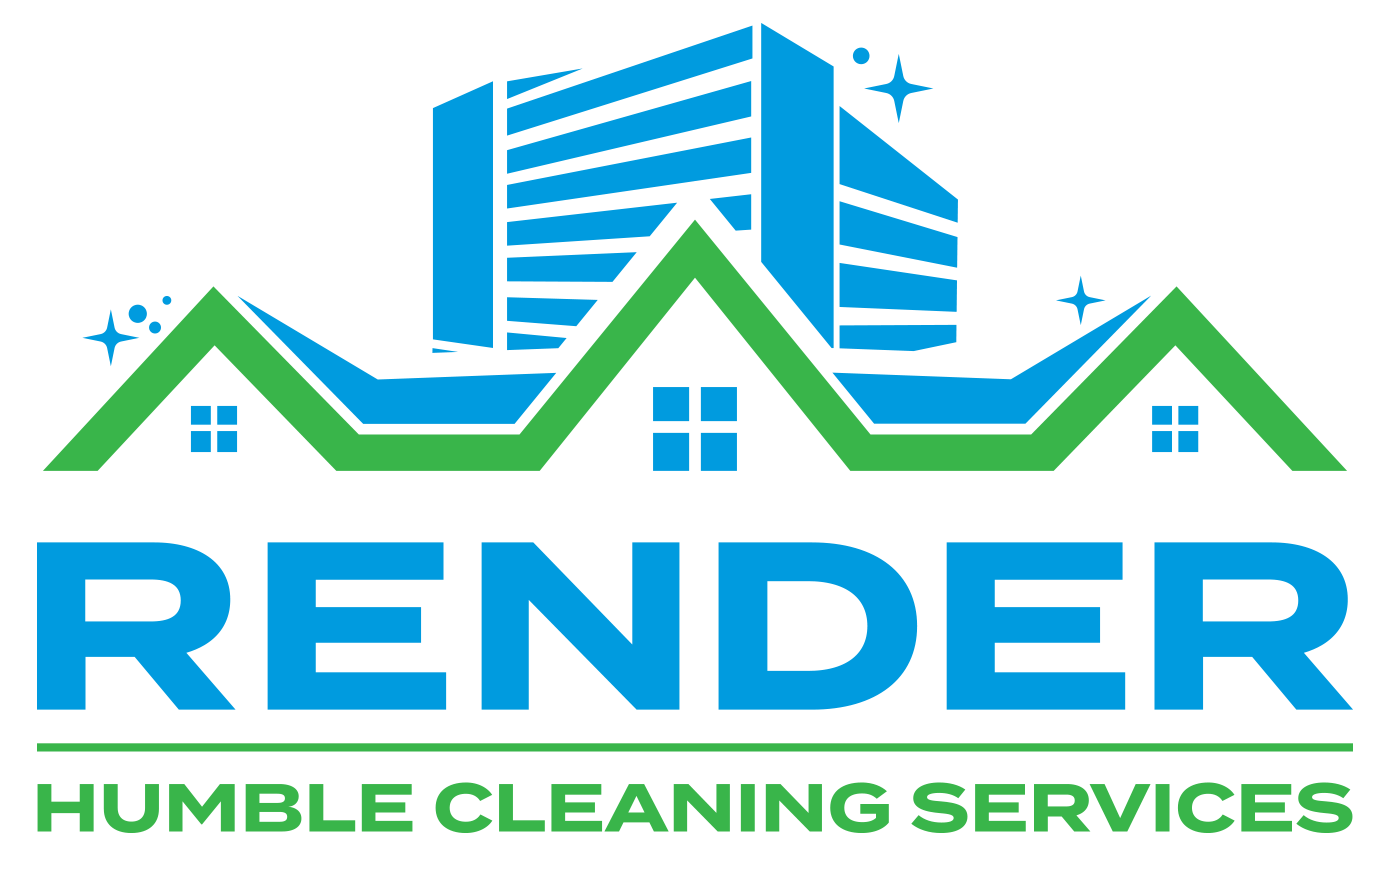 Render Humble Cleaning Services Logo